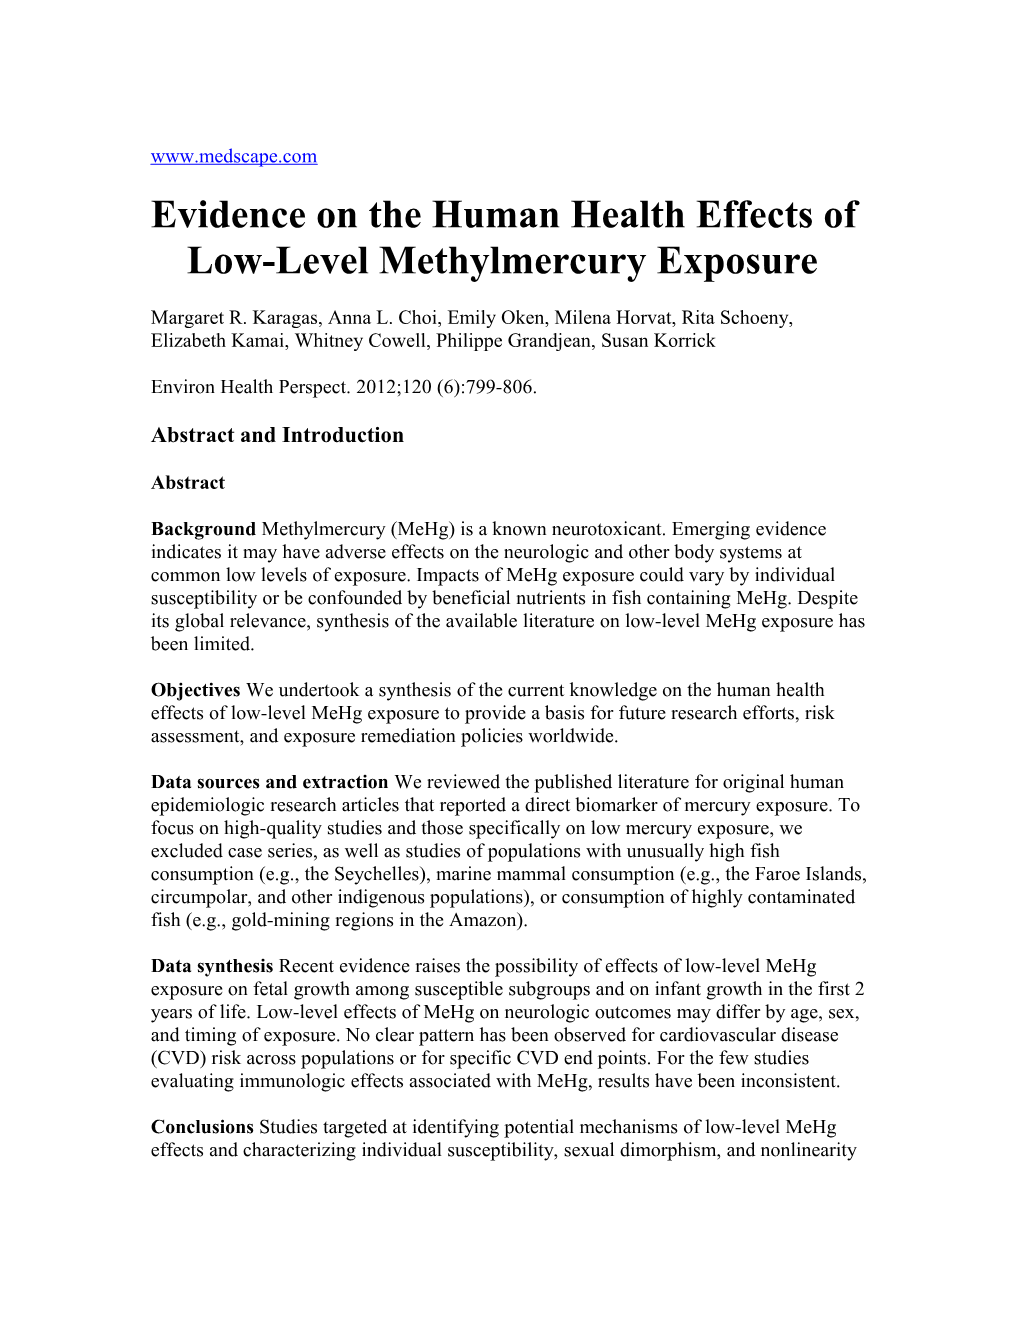 Evidence on the Human Health Effects of Low-Level Methylmercury Exposure